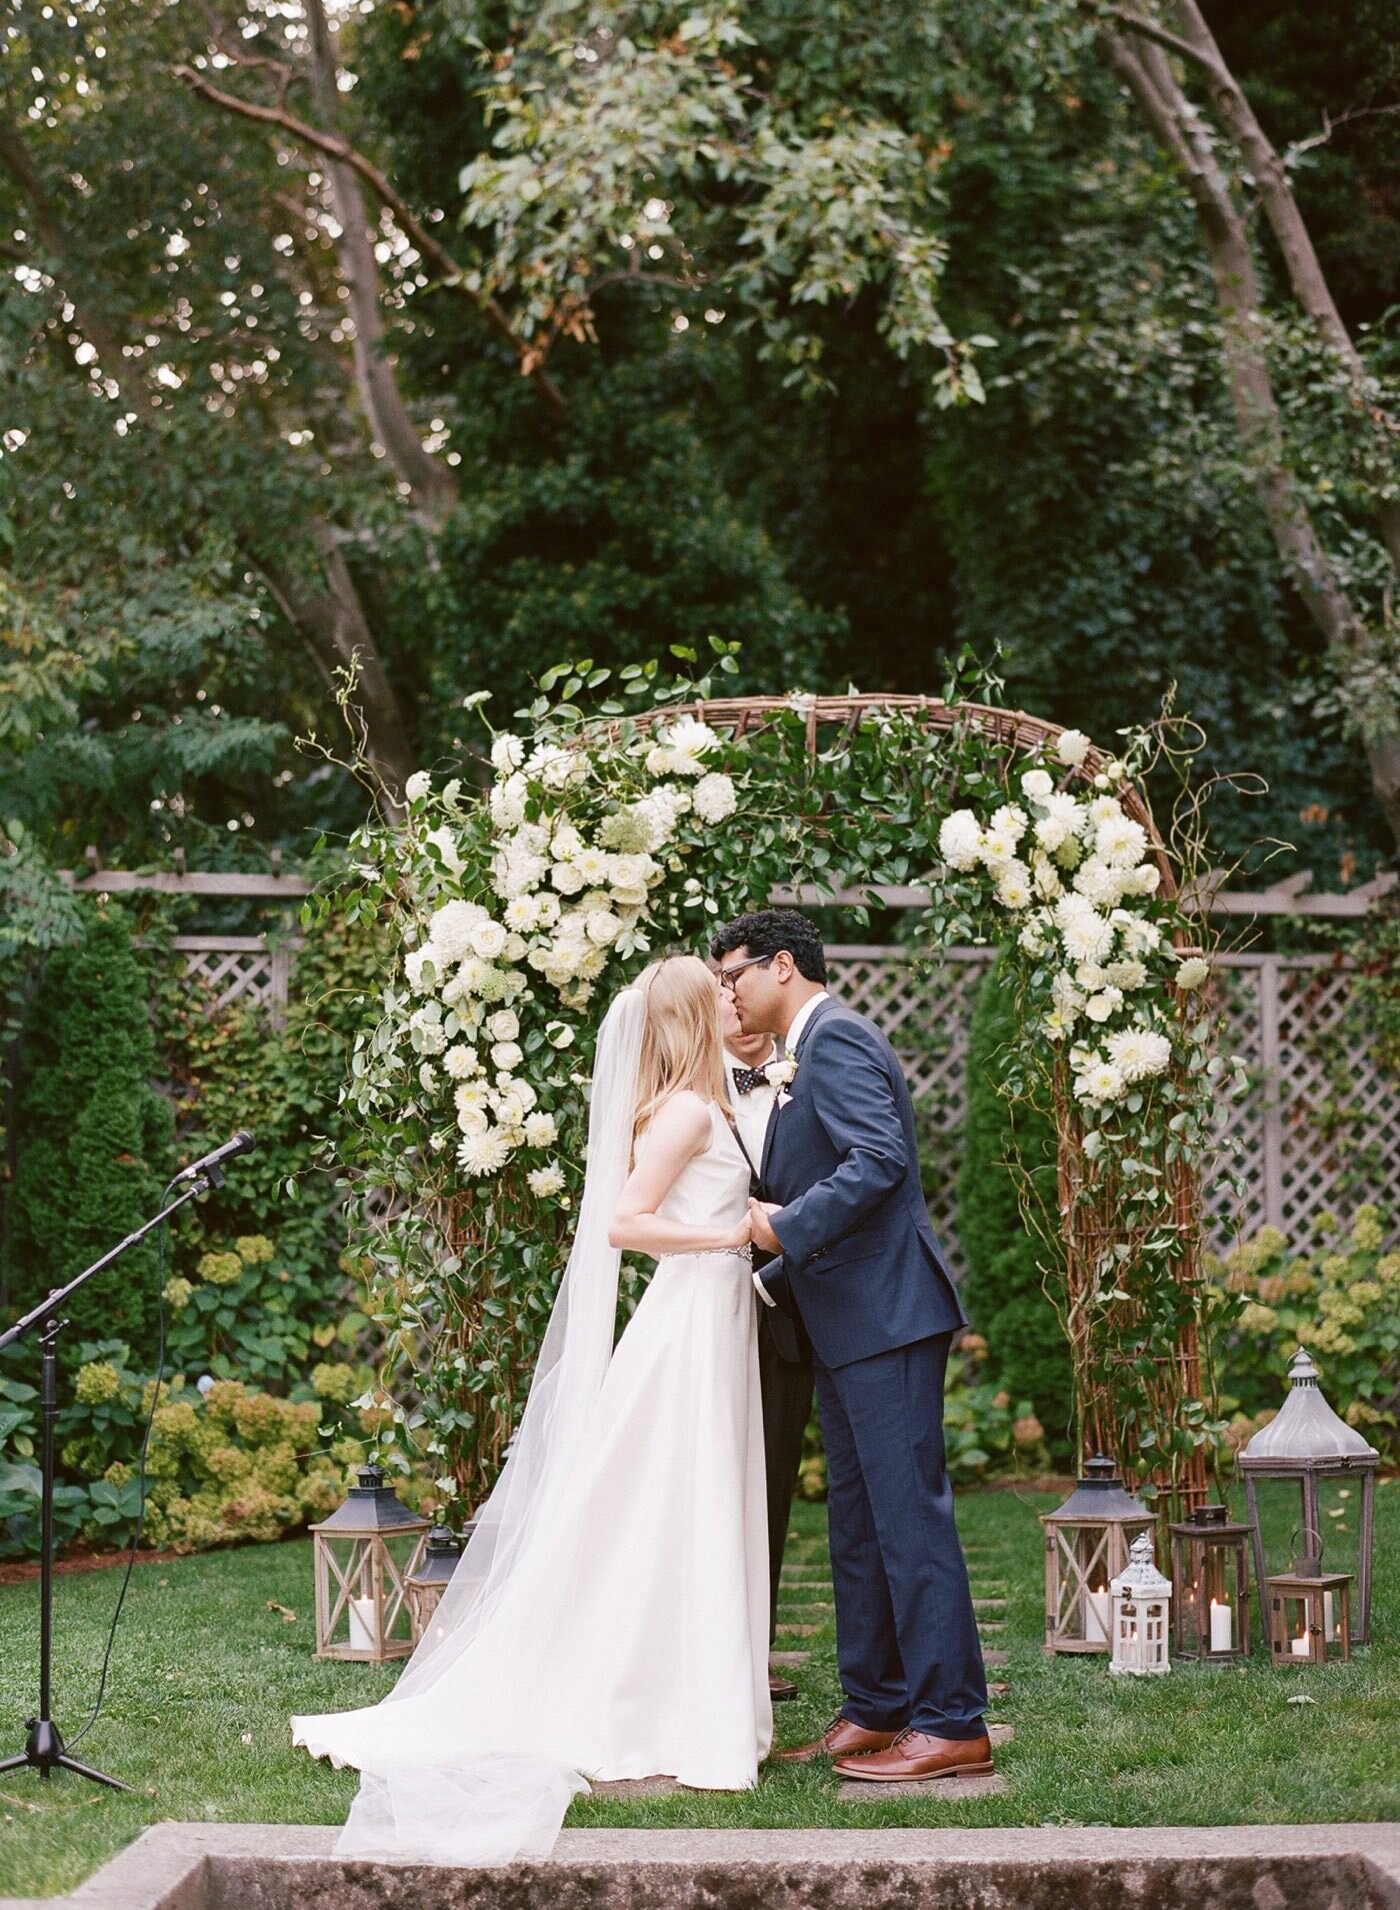 First kiss at an Admiral's House wedding with green and white floral design